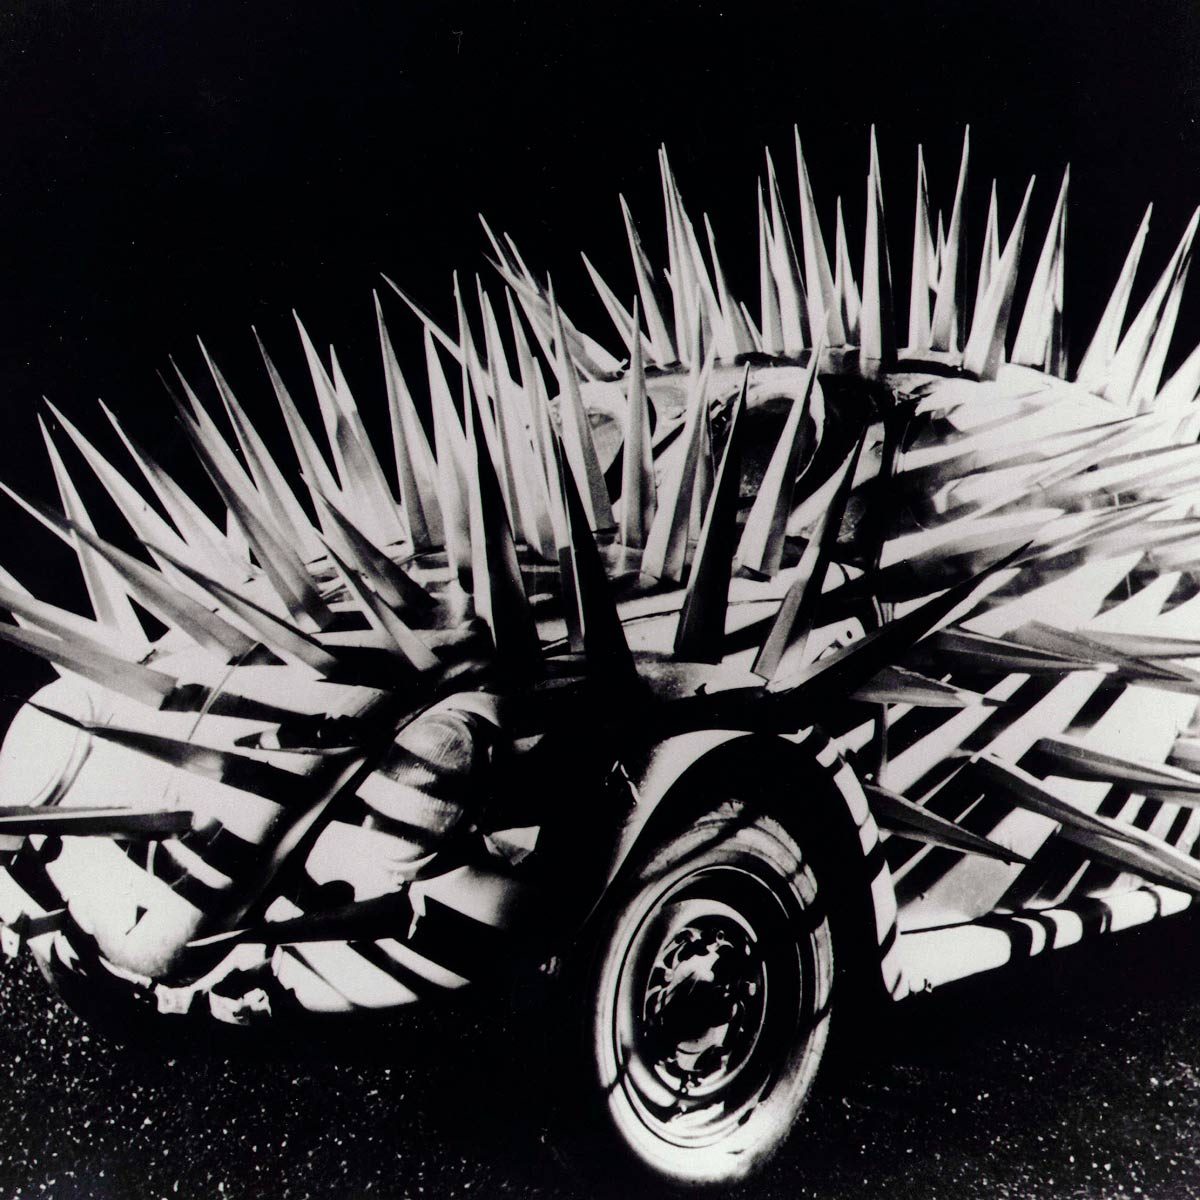 VW Beetle with spikes from the movie The Cars that Ate Paris